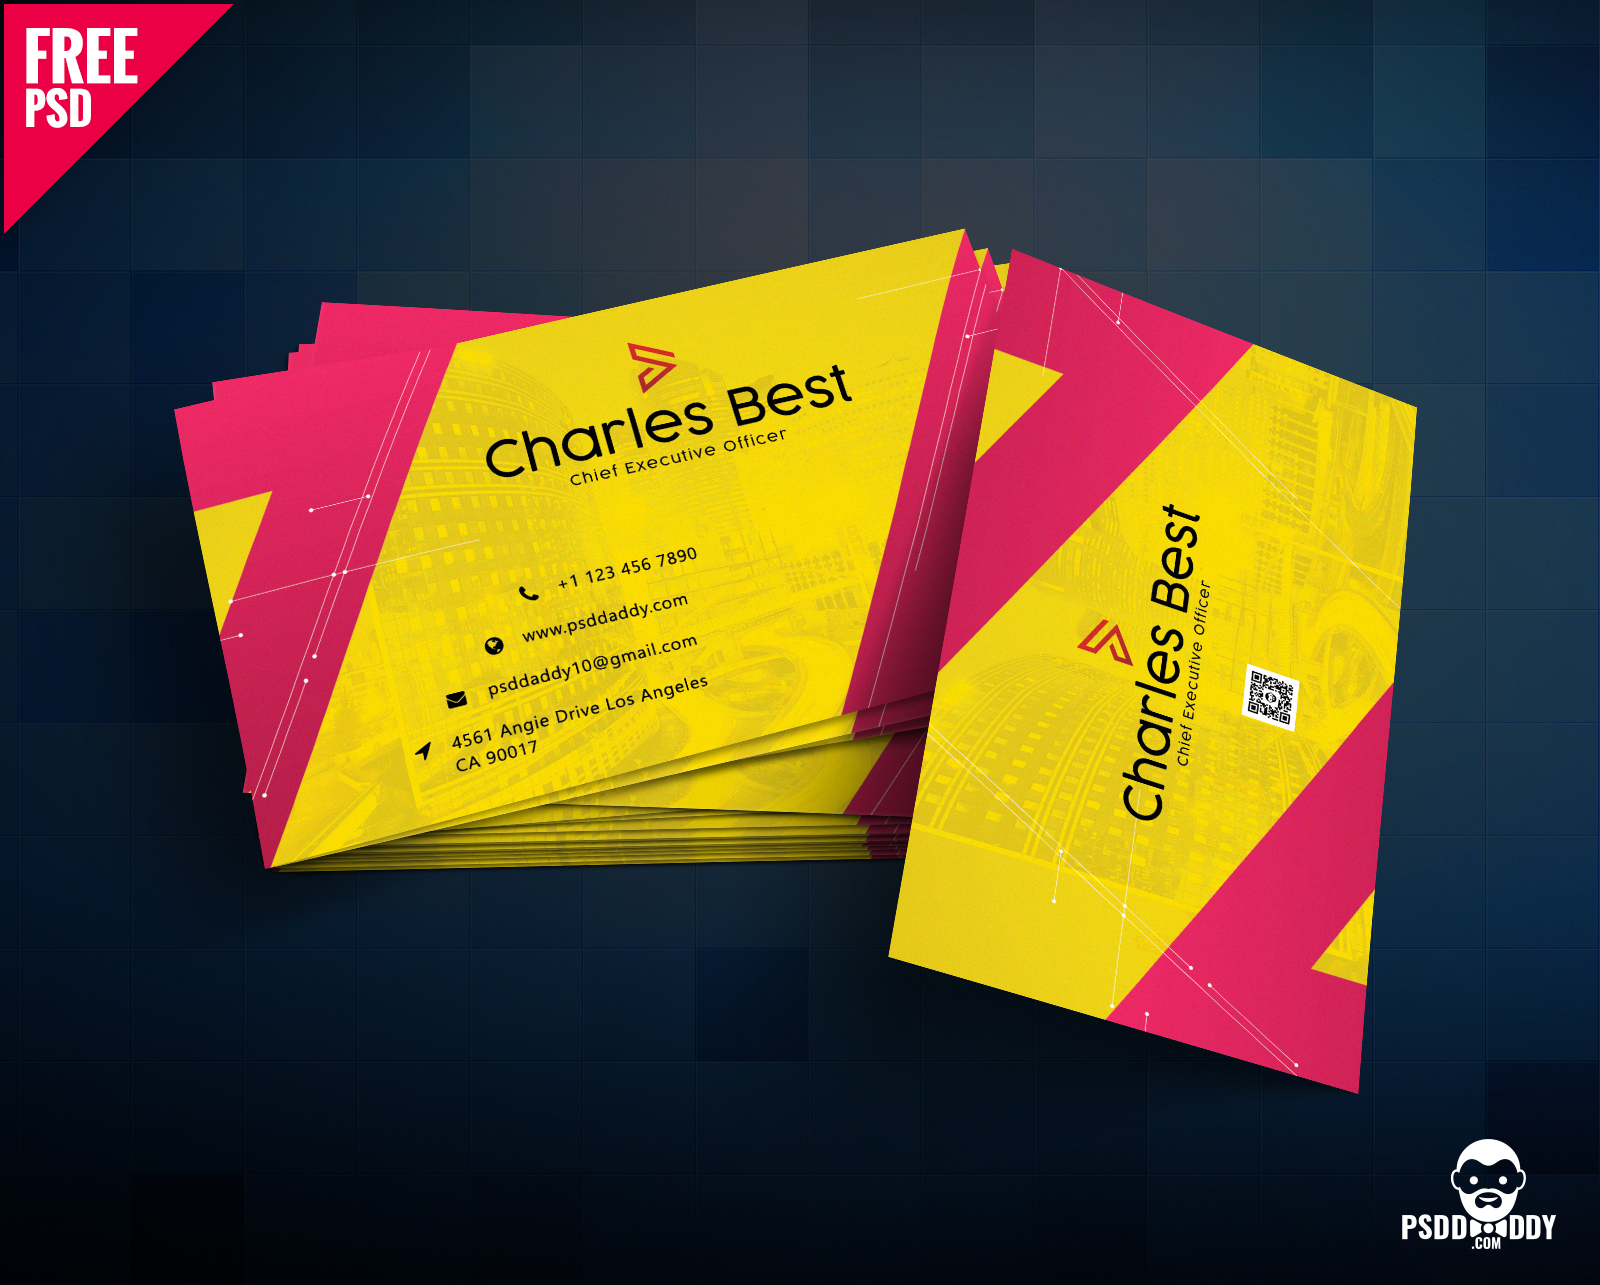 Download] Creative Business Card Free Psd | Psddaddy With Psd Name Card Template